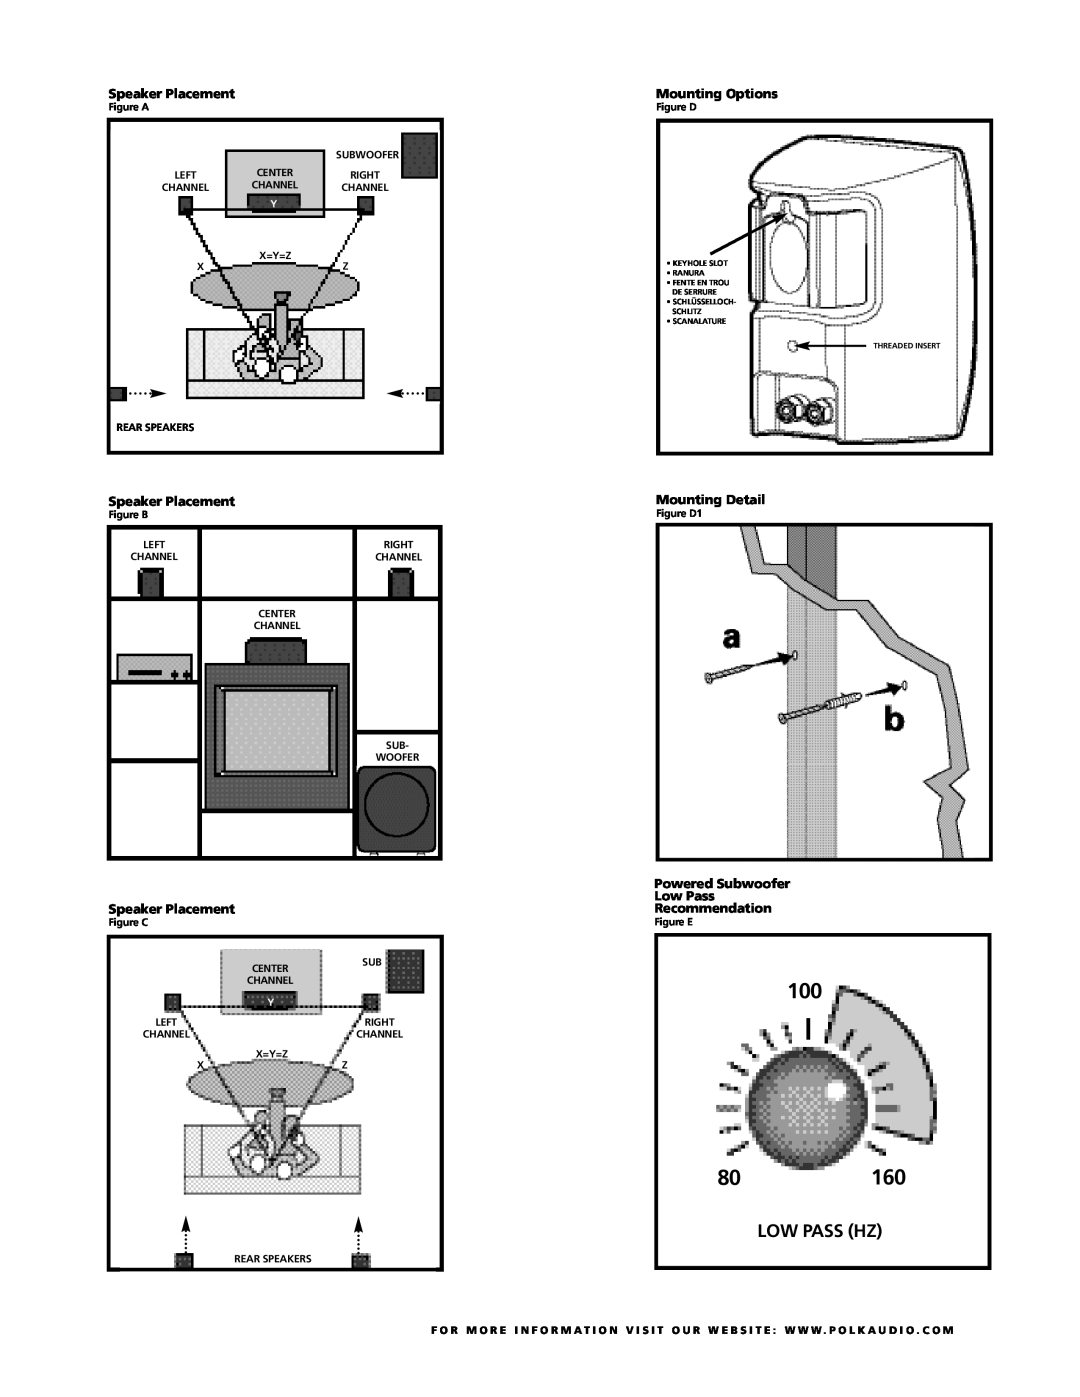 Polk Audio 6700 owner manual 100, Low Pass Hz, Speaker Placement, Mounting Options, Mounting Detail 